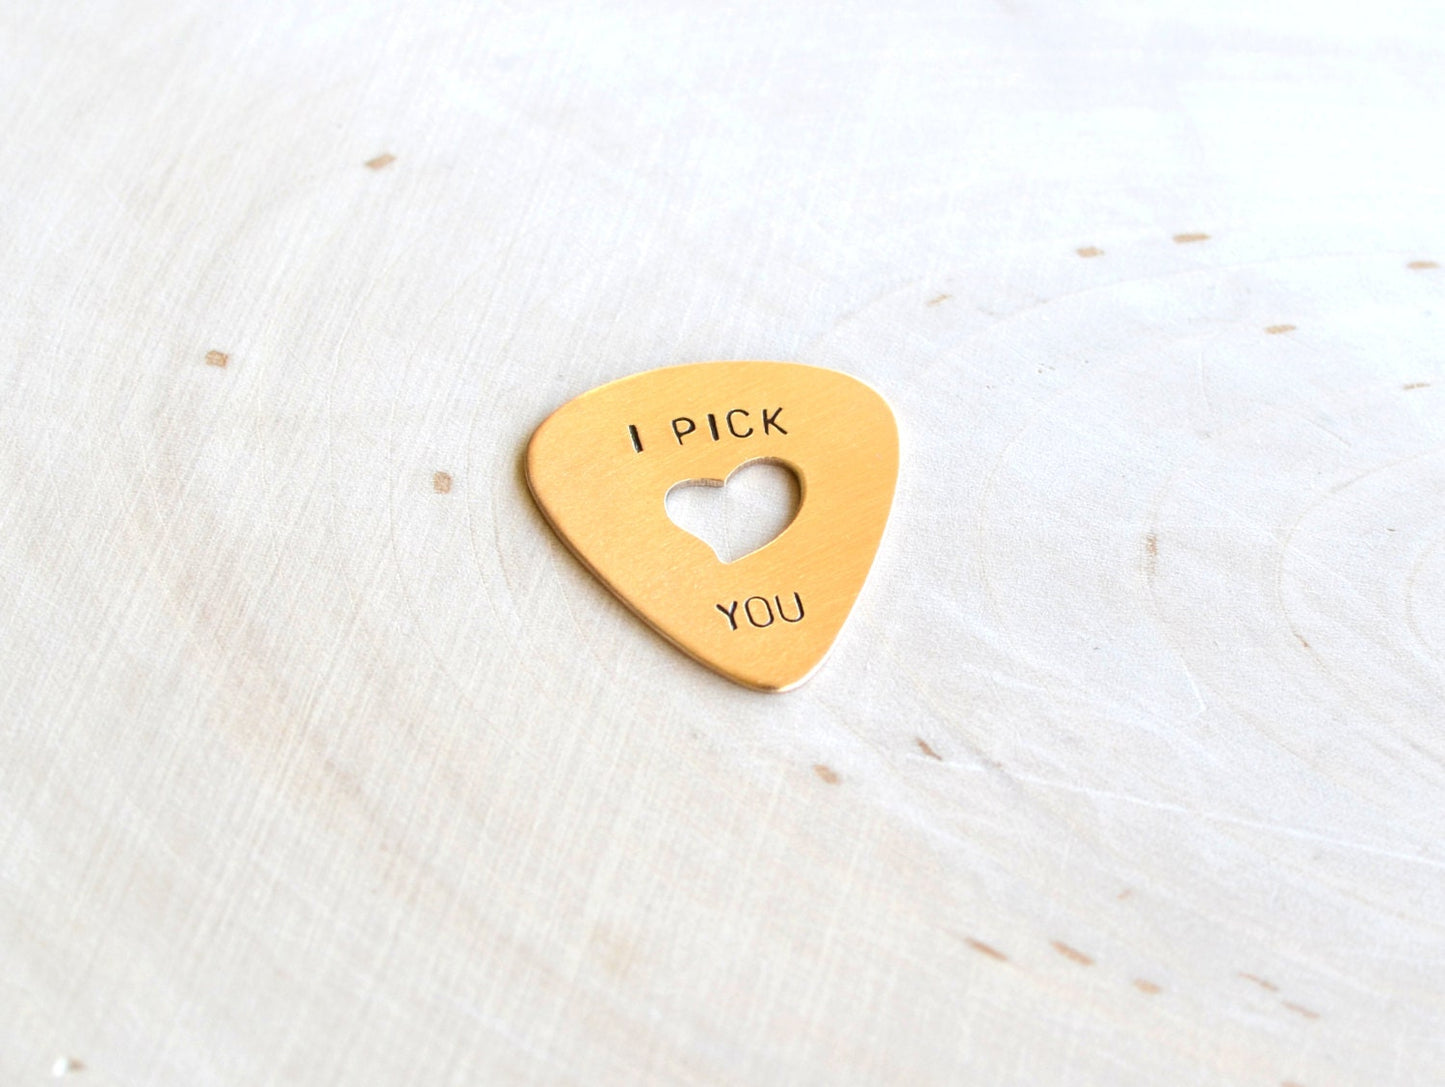 Heart in bronze guitar pick and I pick you